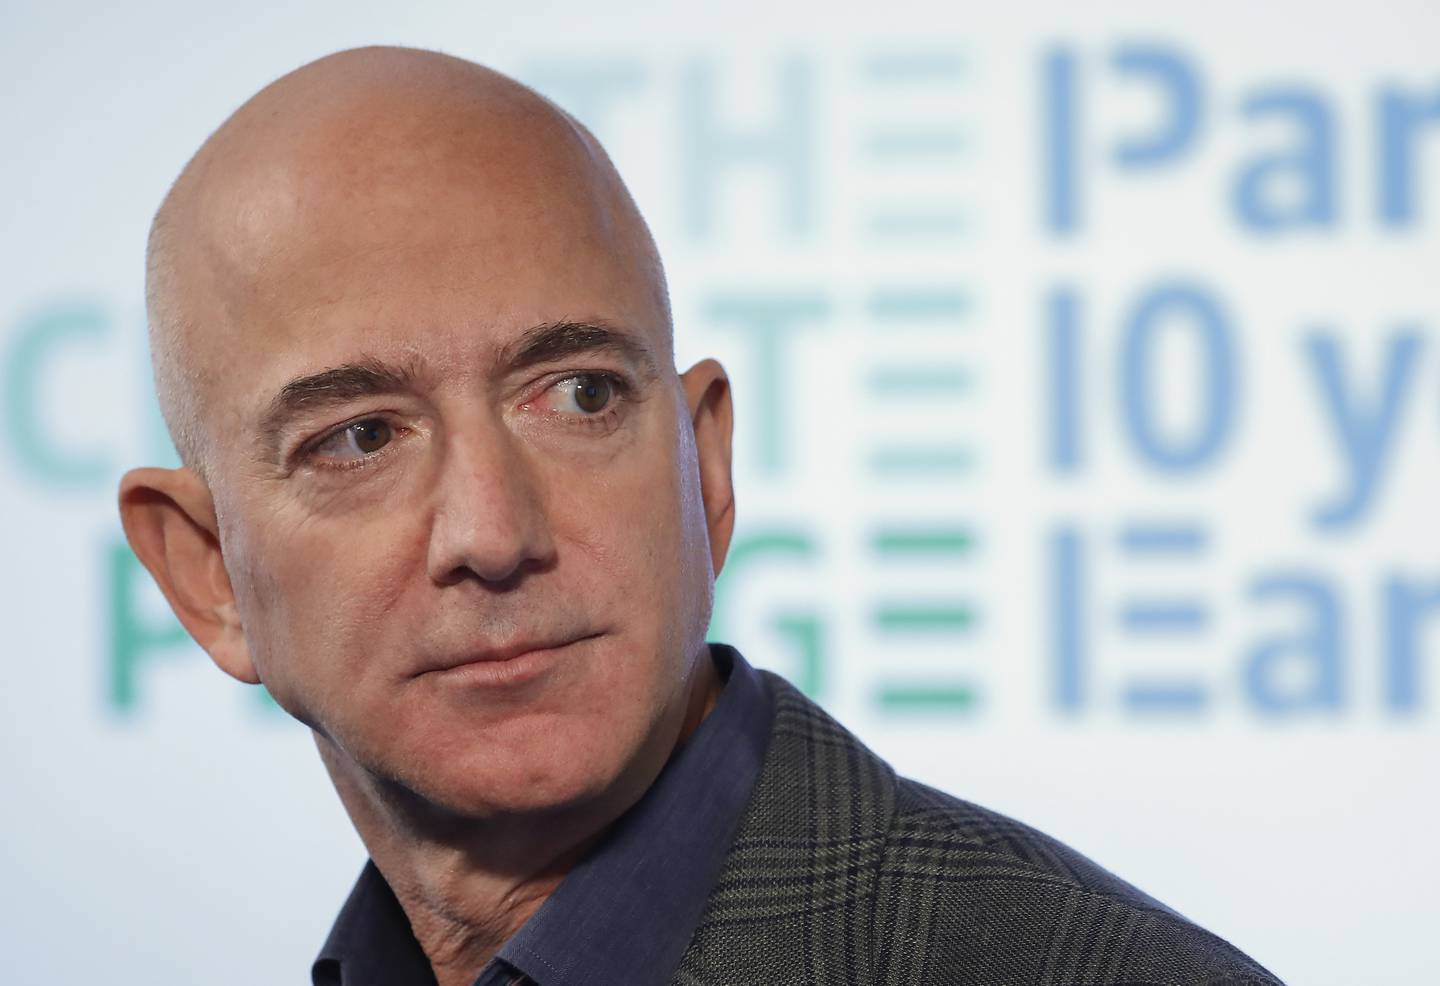 Amazon founder Jeff Bezos lost $87.6 billion from his net worth in 2022. AP 